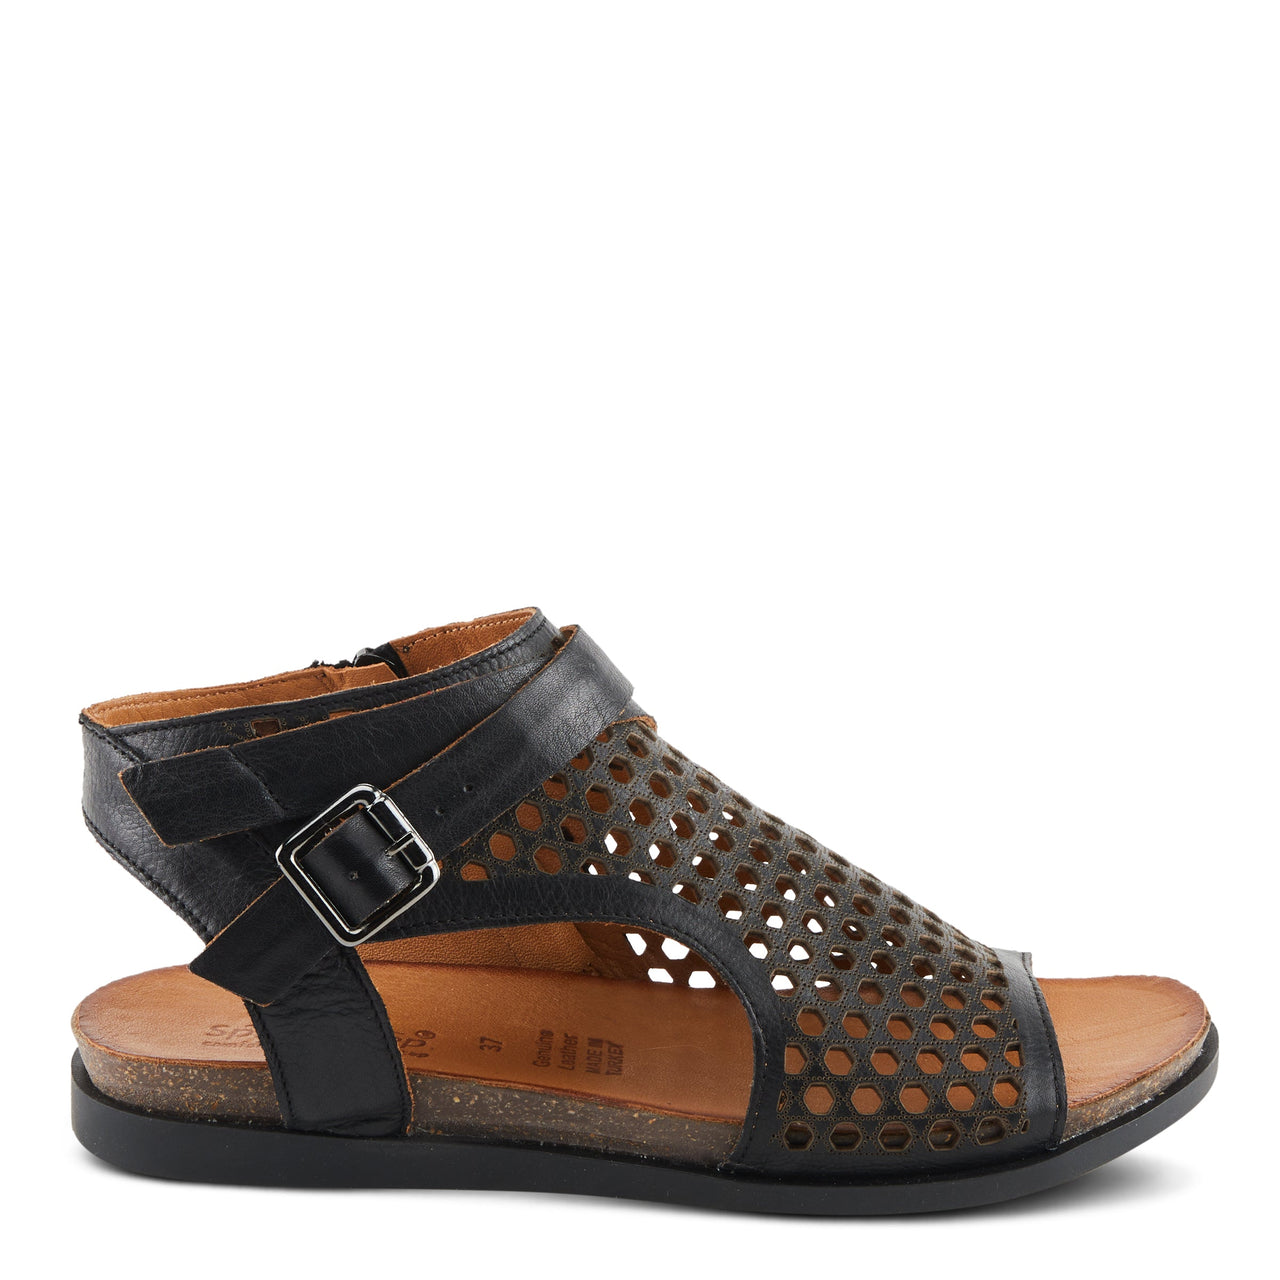 Spring Step Covington Sandals in tan leather with cushioned insoles and adjustable ankle strap for stylish and comfortable summer wear